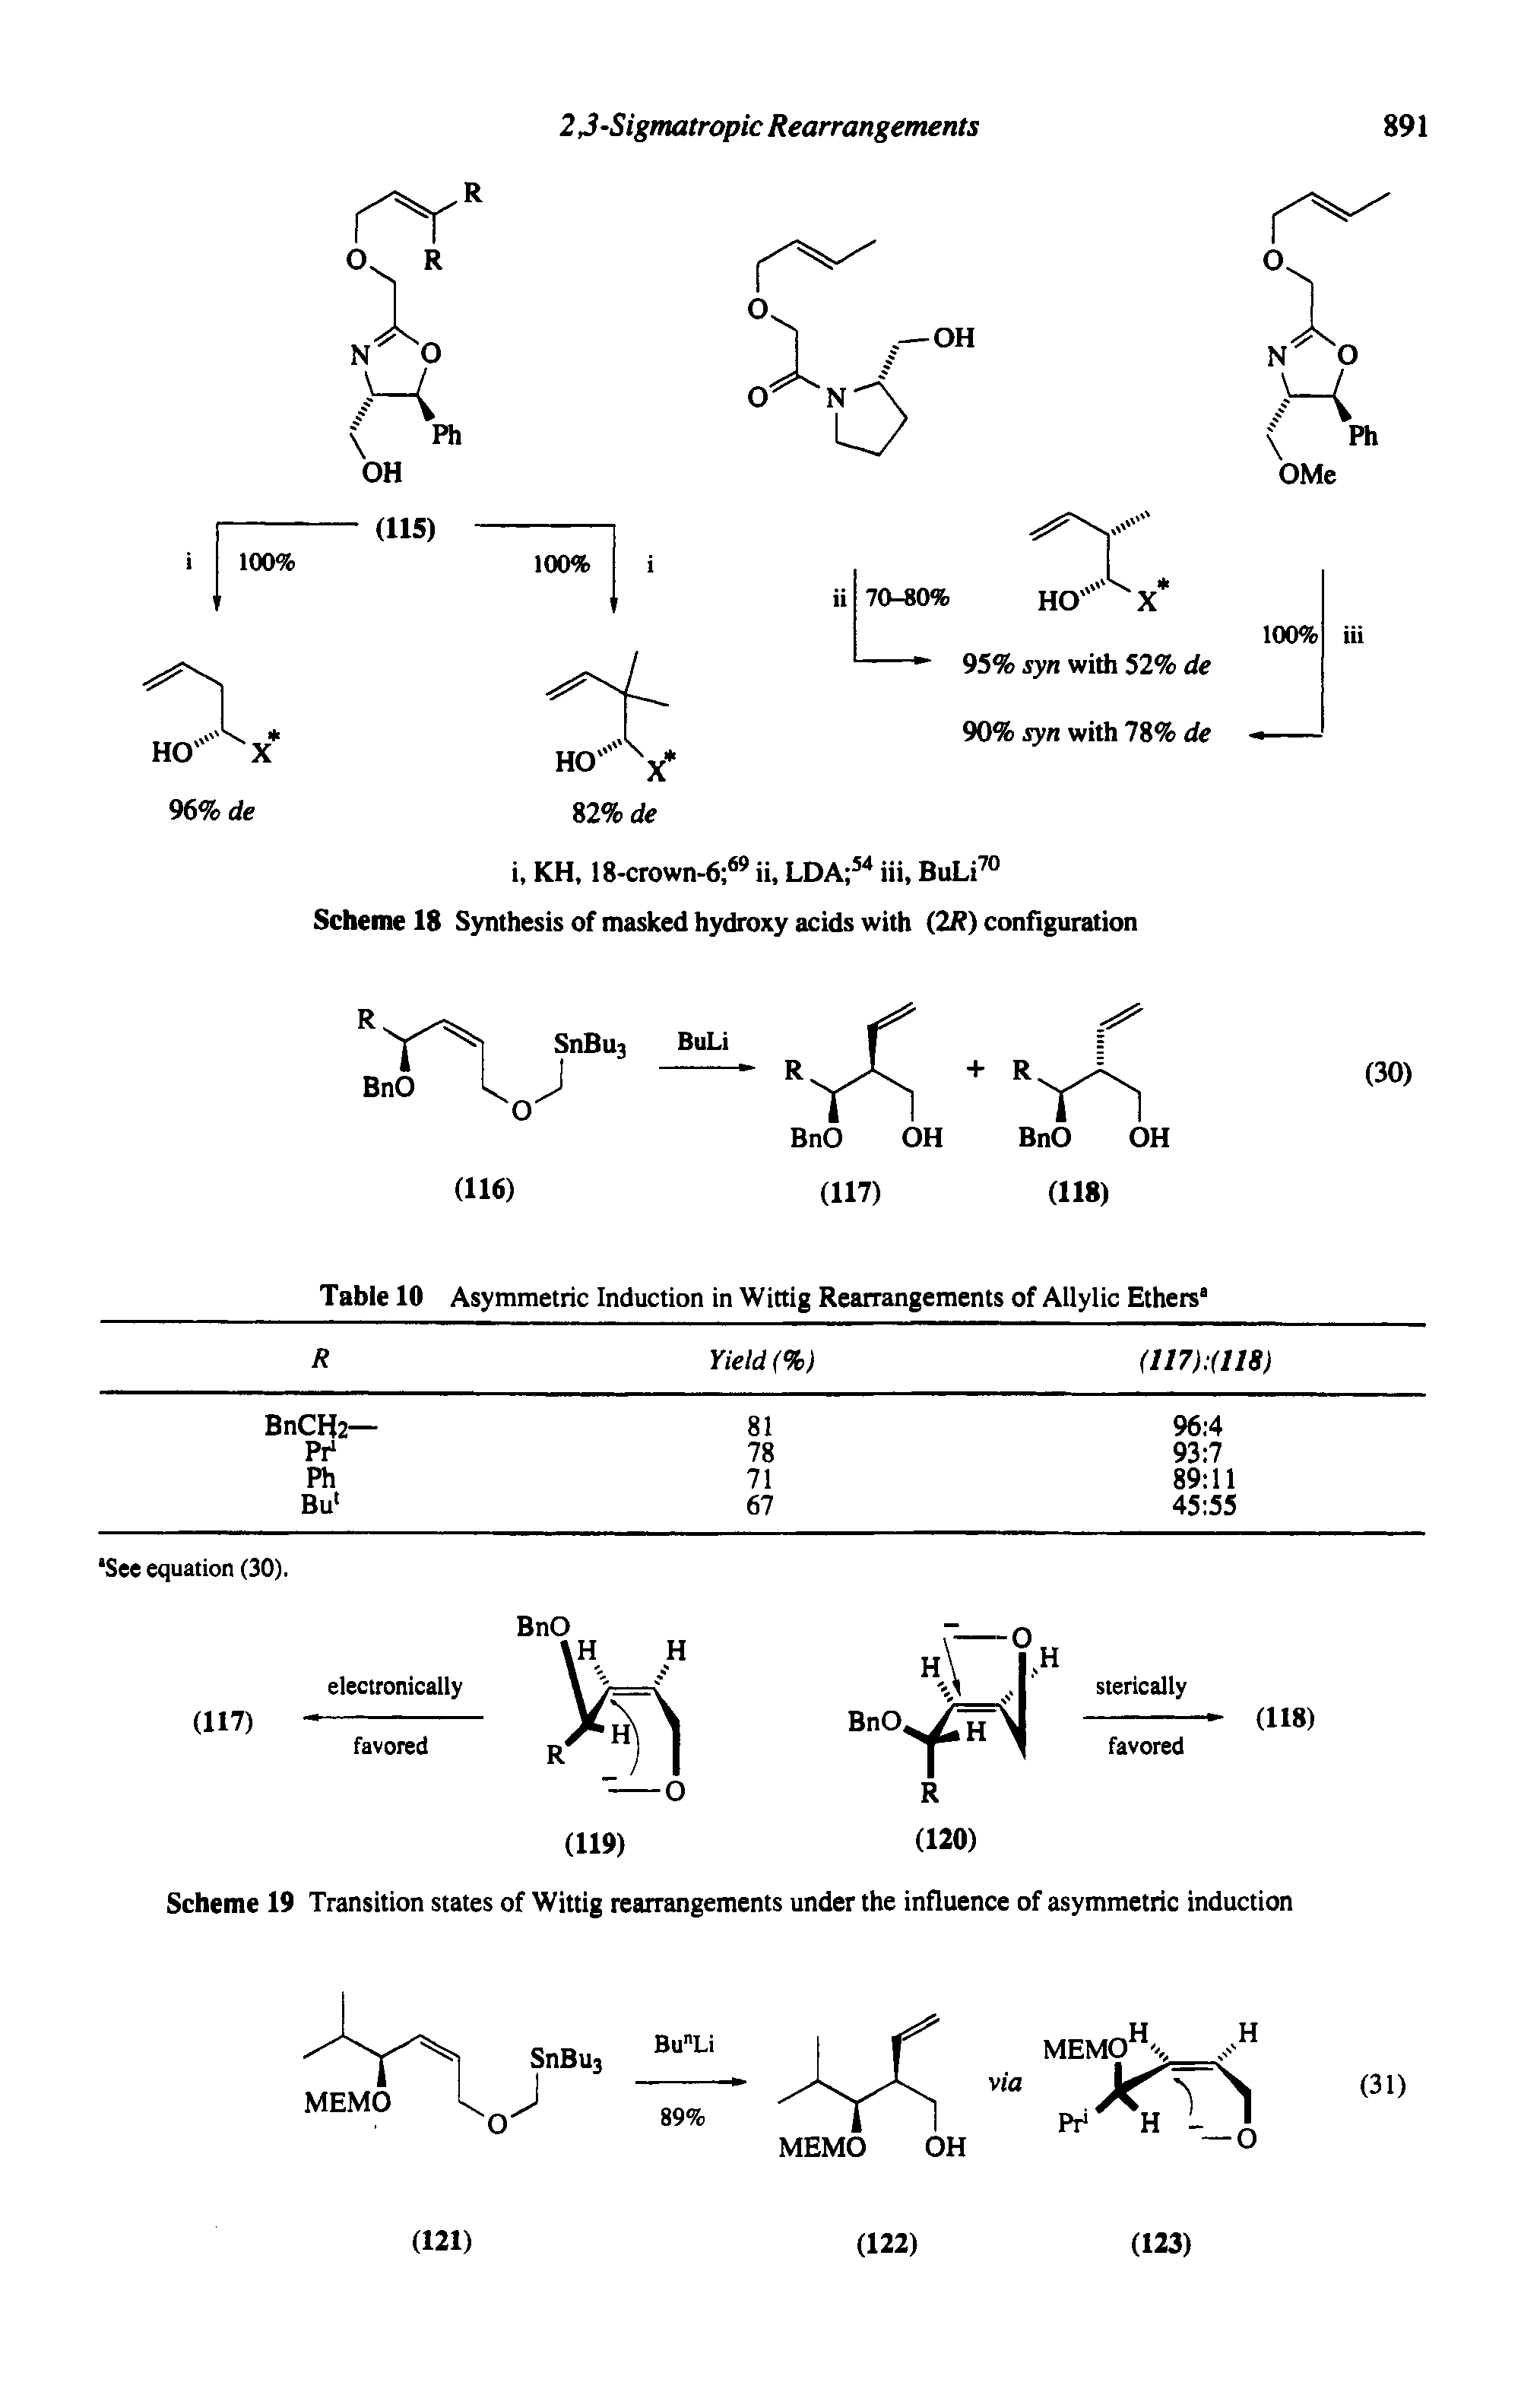 Table 10 Asymmetric Induction in Wittig Rearrangements of Allylic Ethers ...